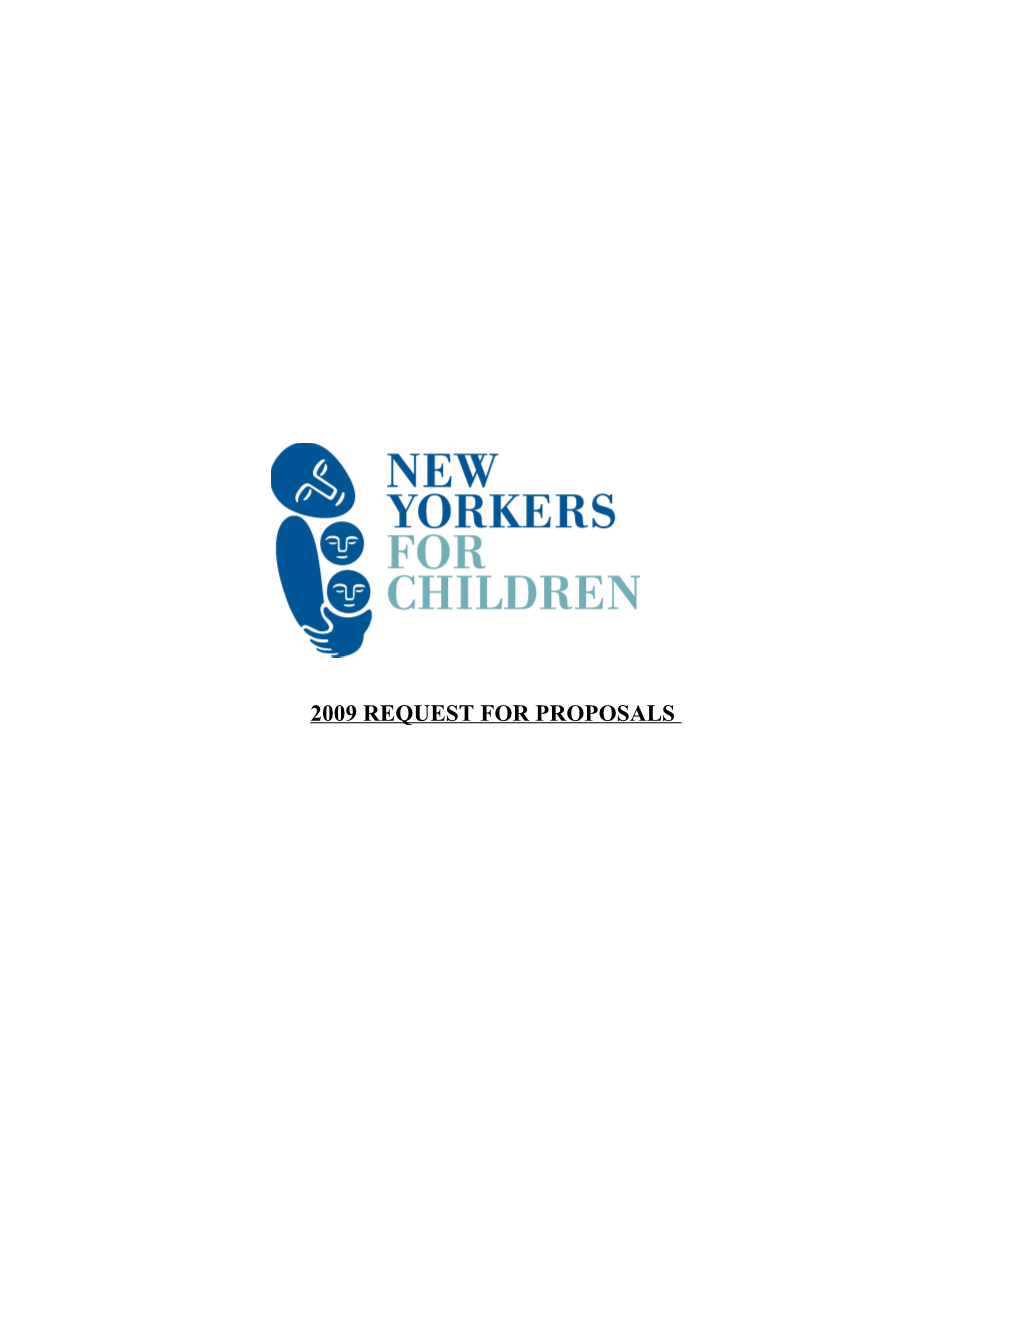 New Yorkers for Children